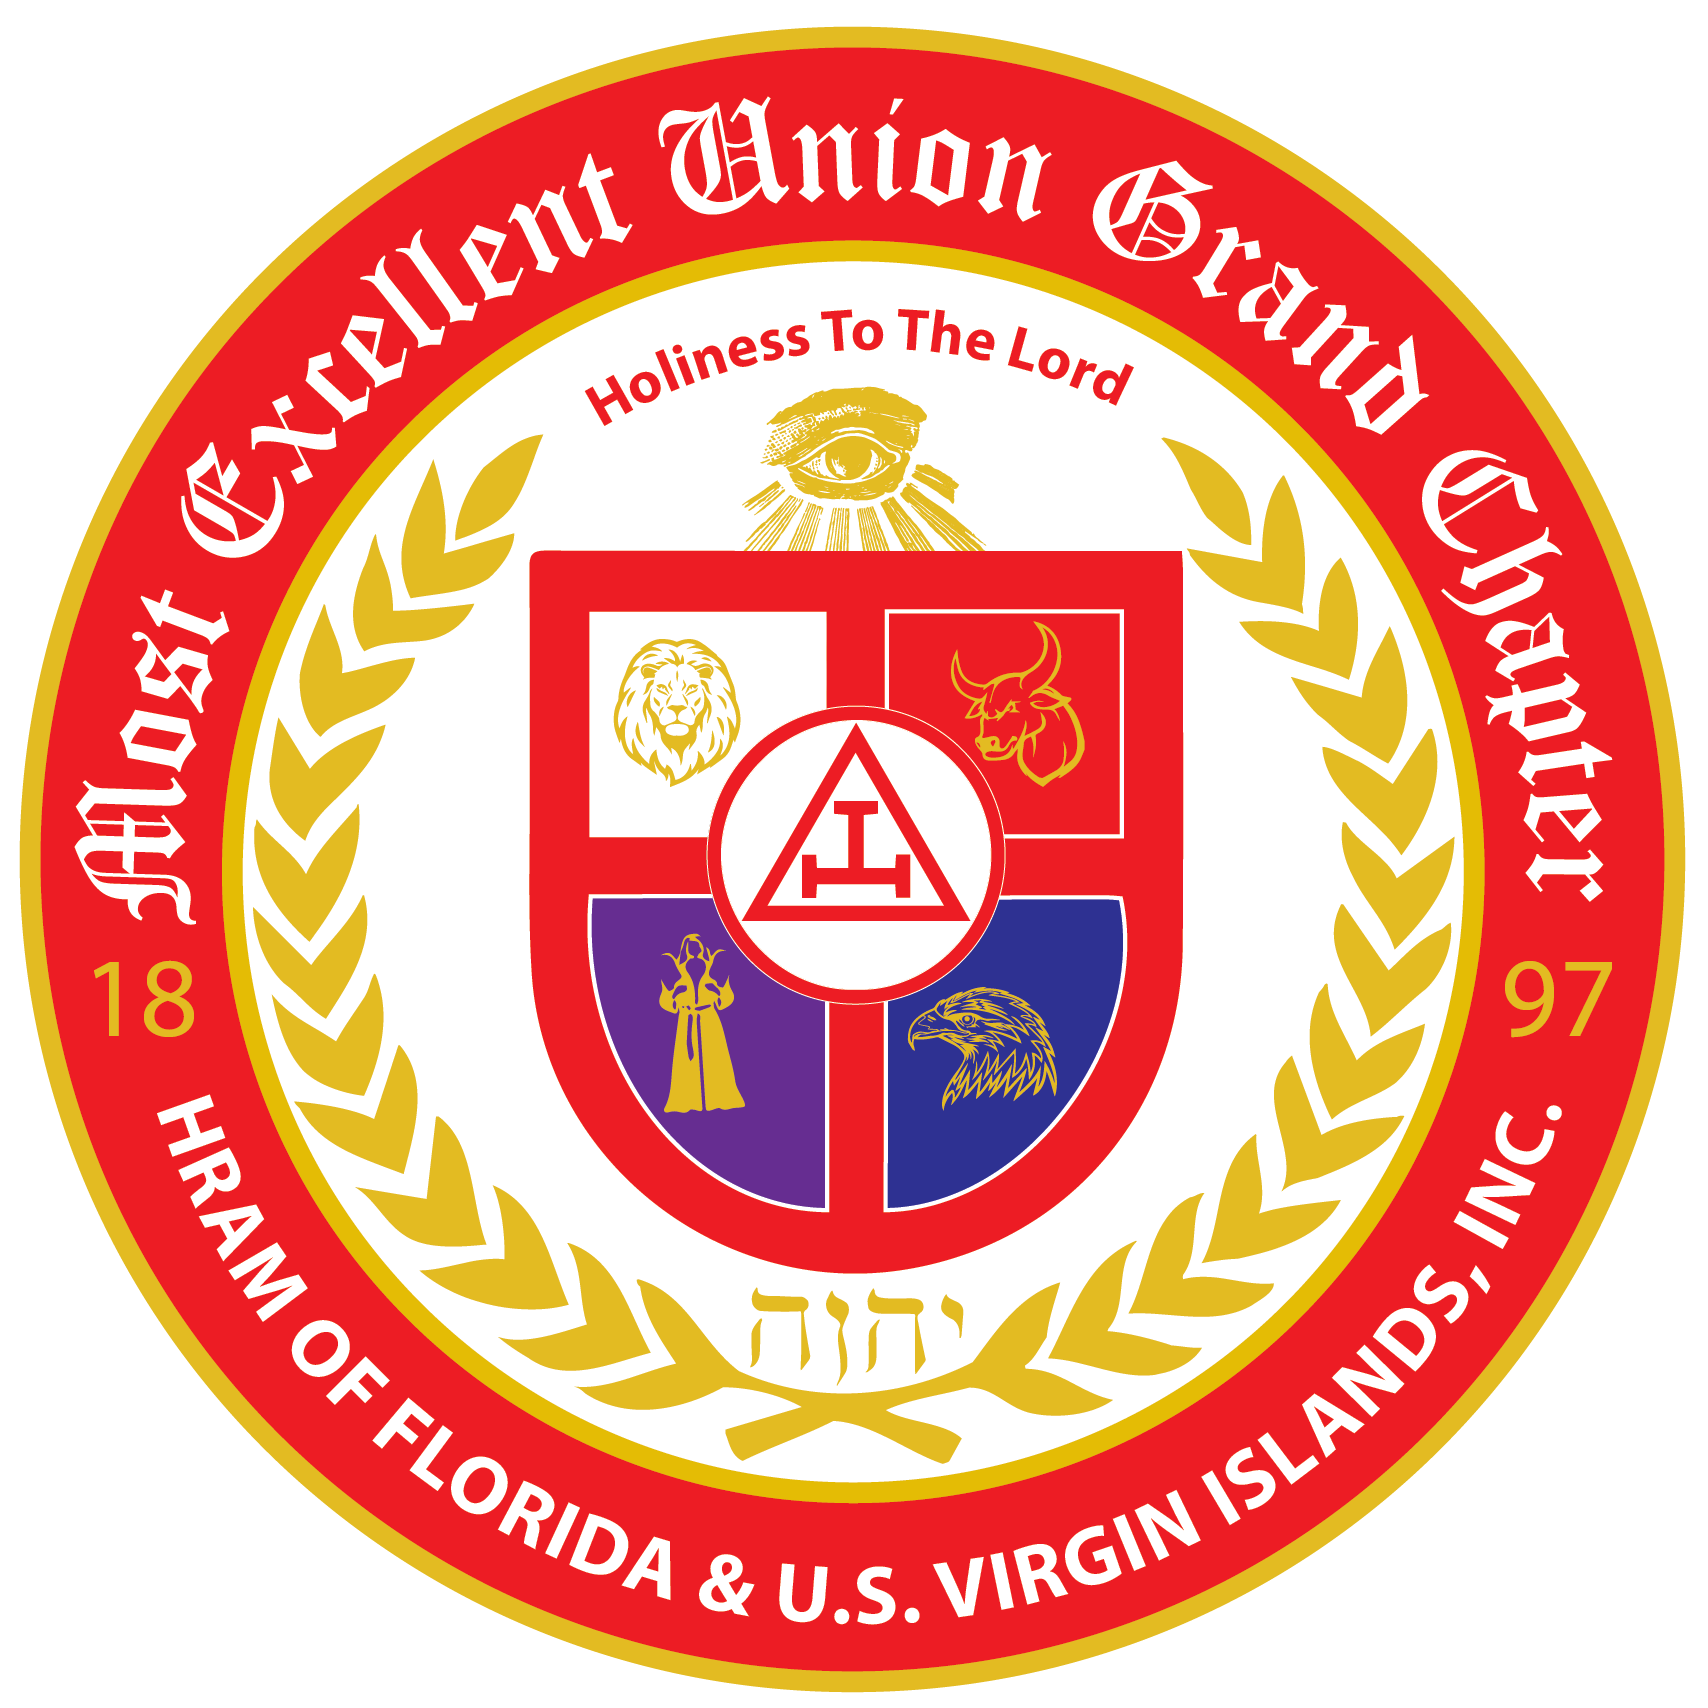 Most Excellent Union Grand Chapter